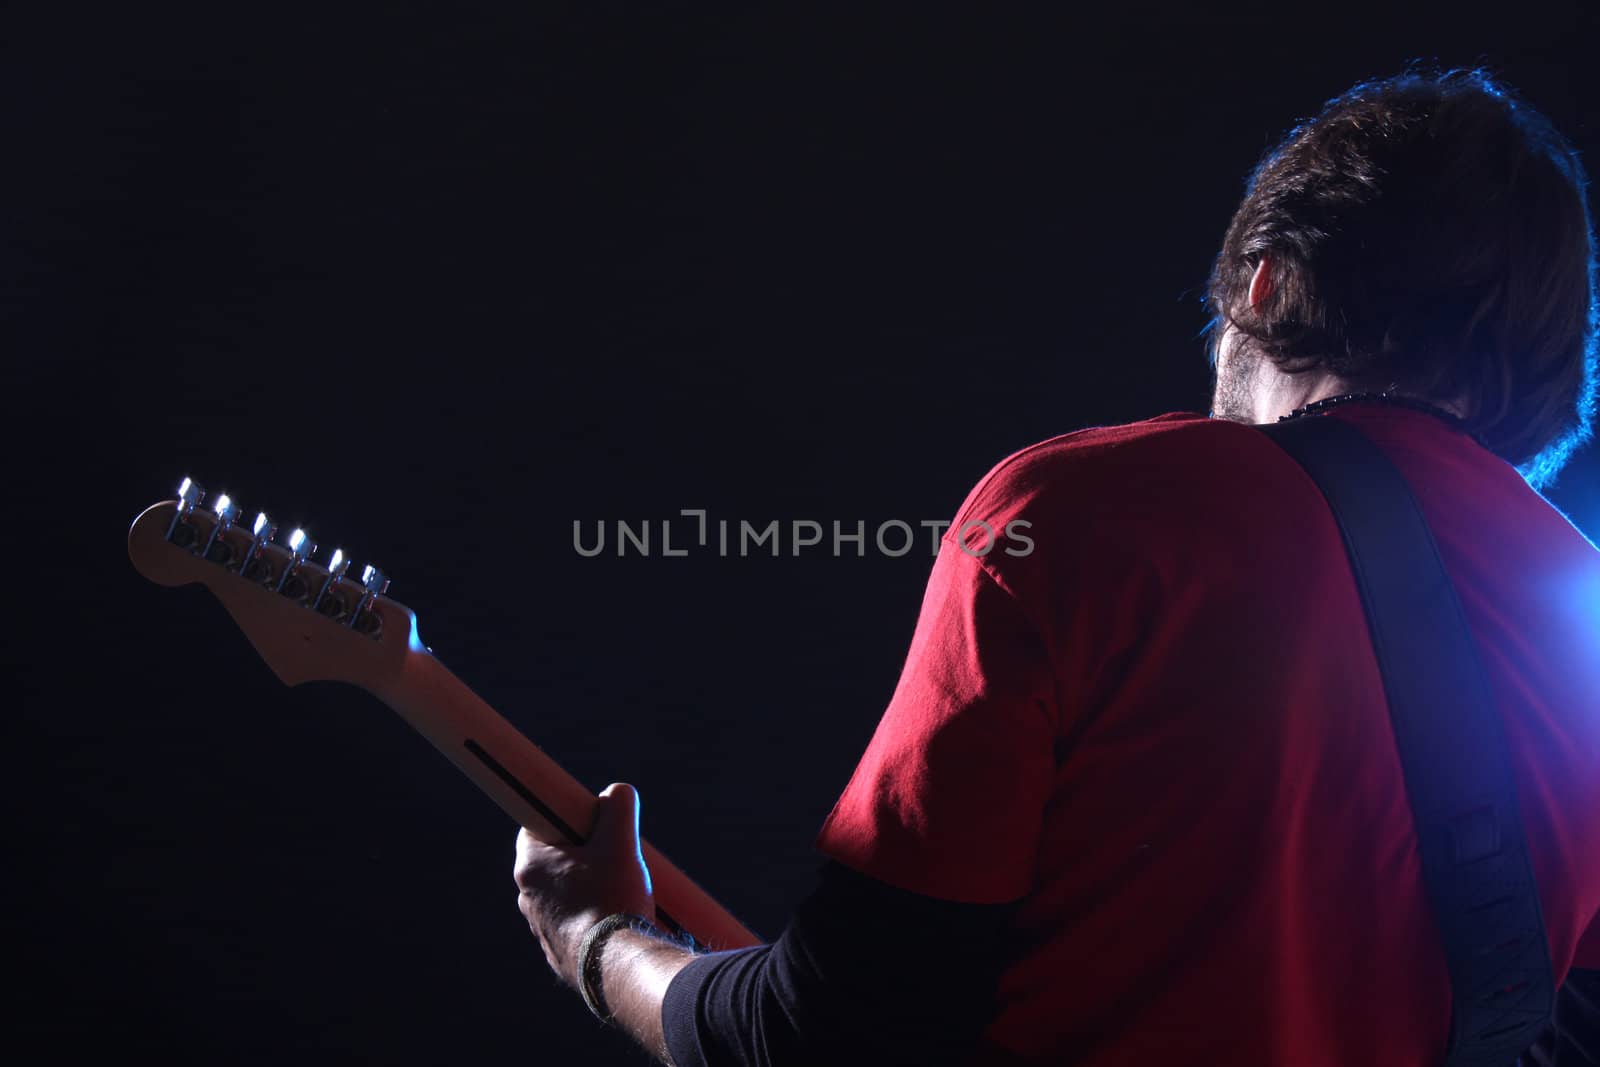 Guitar player on stage by Erdosain